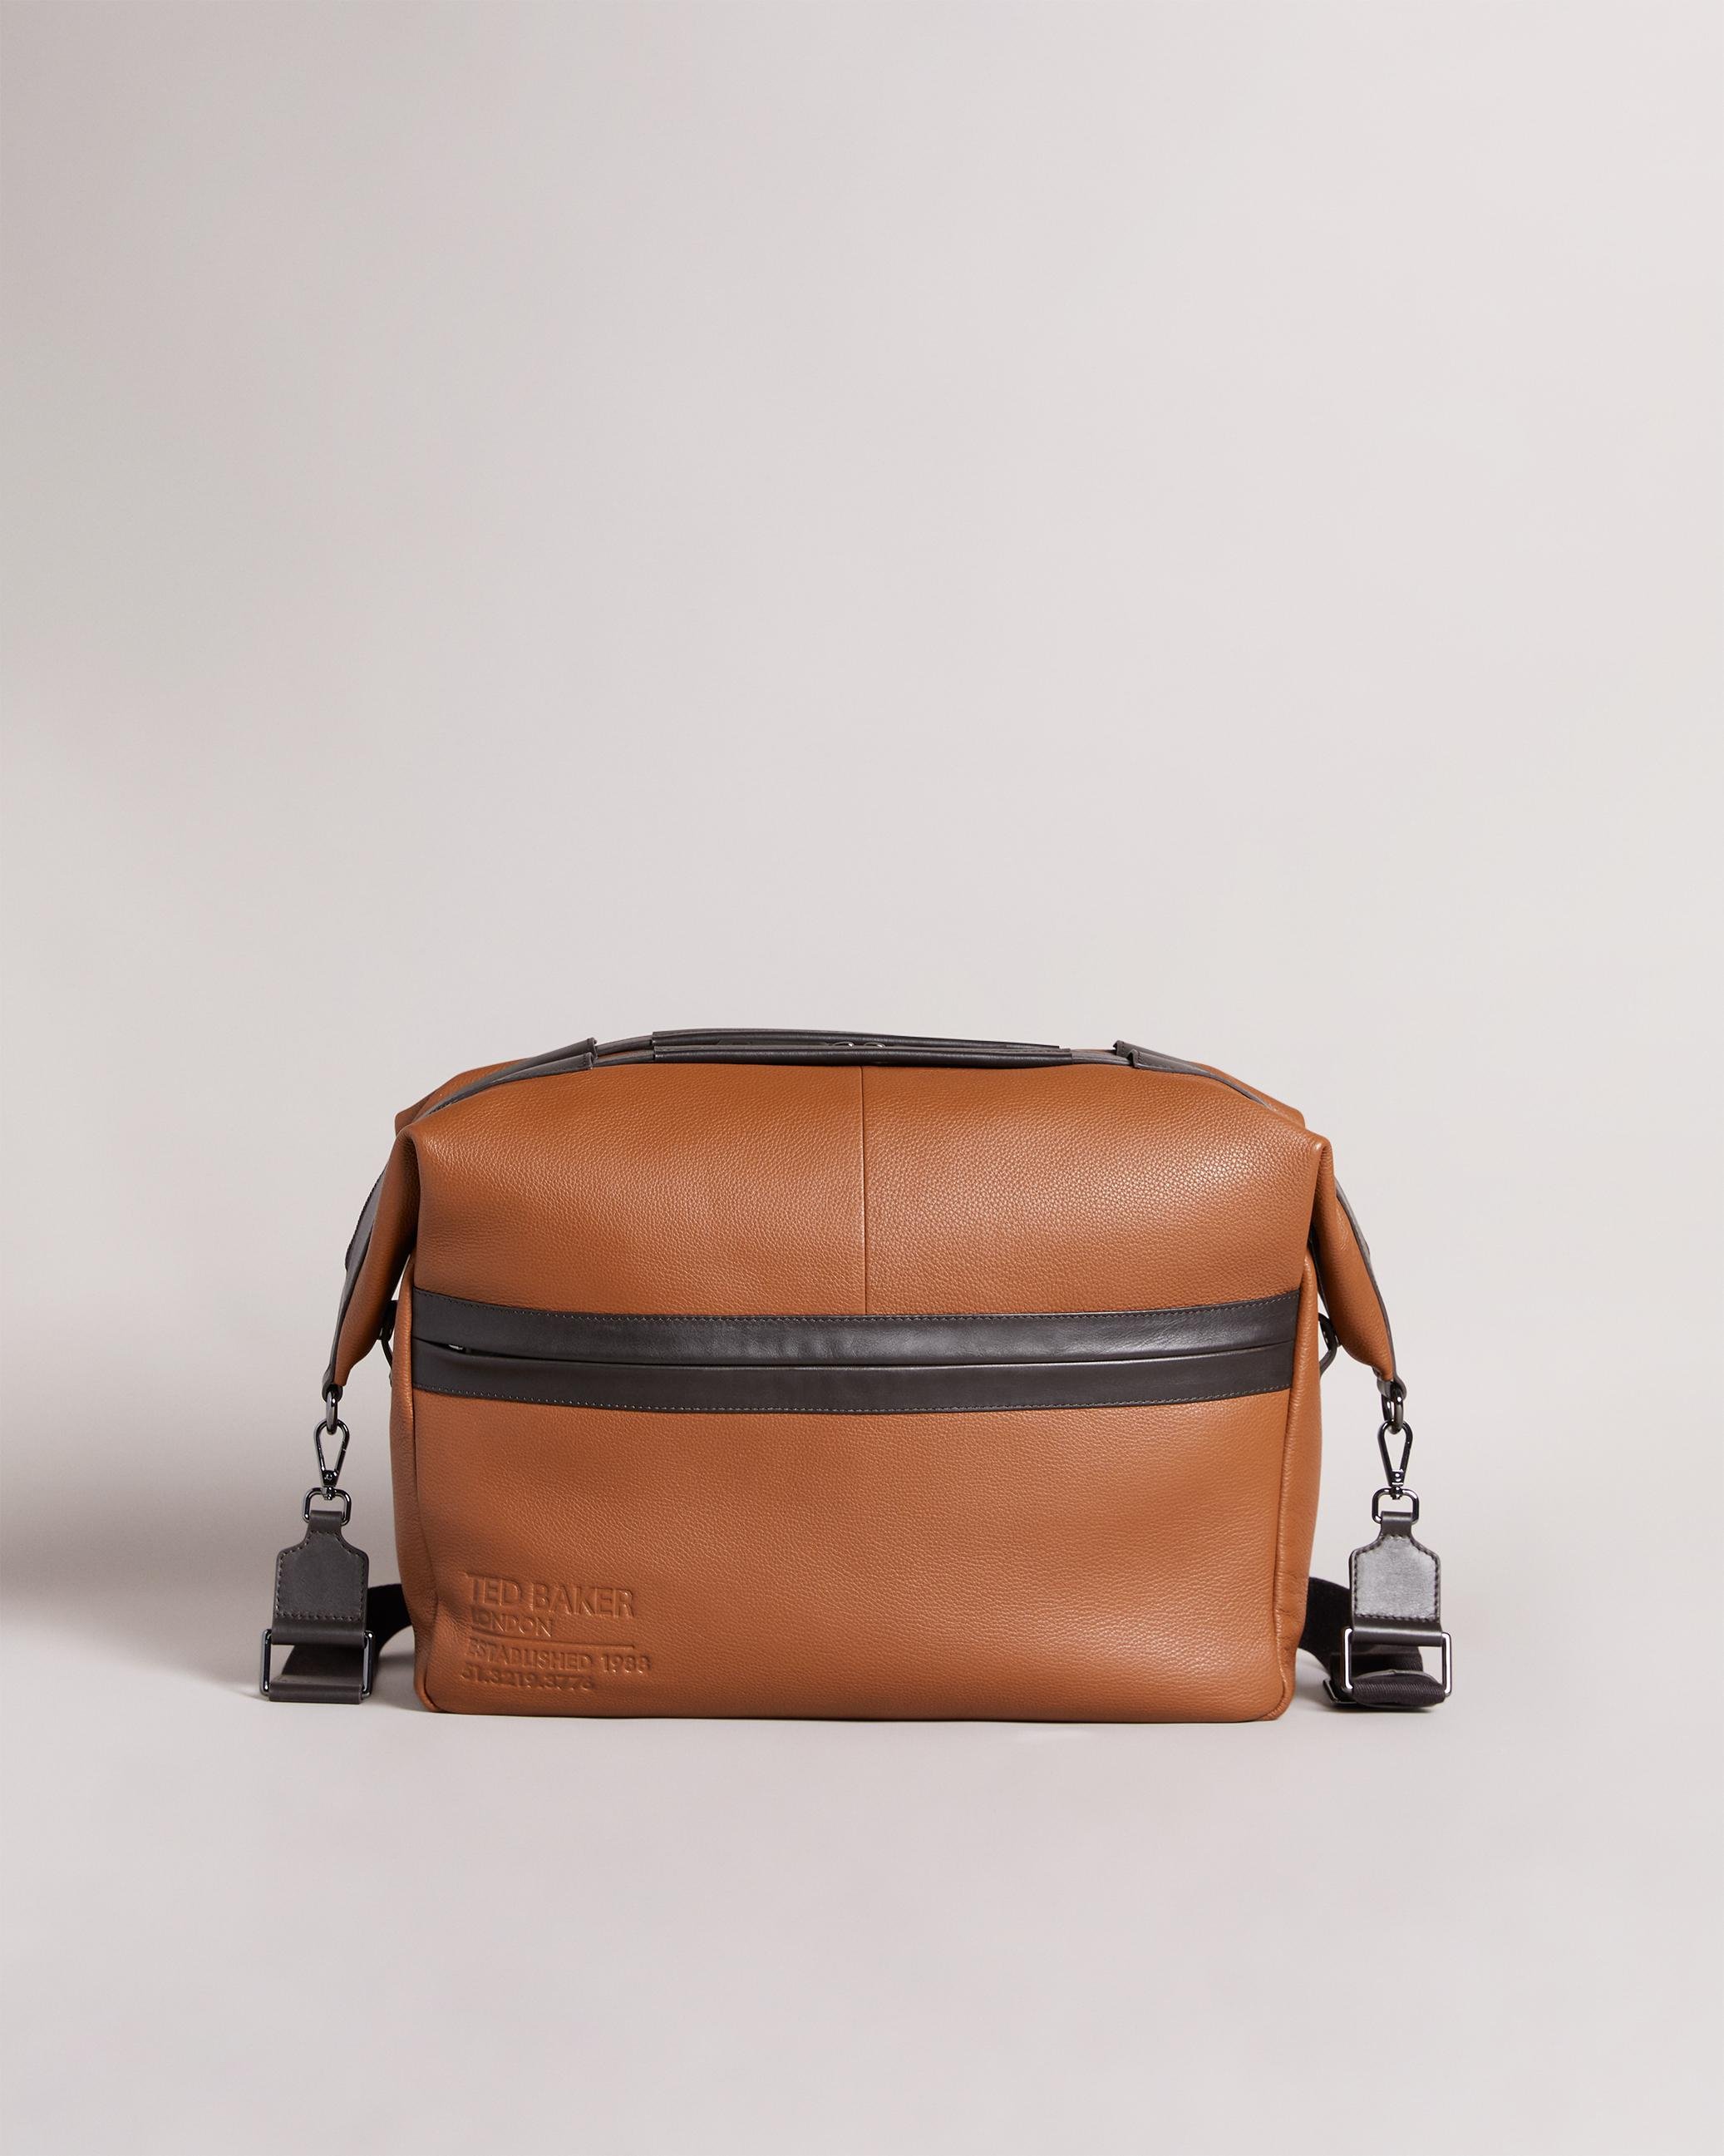 Branded Leather Holdall - KAISEL - Dark Tan by TED BAKER | jellibeans